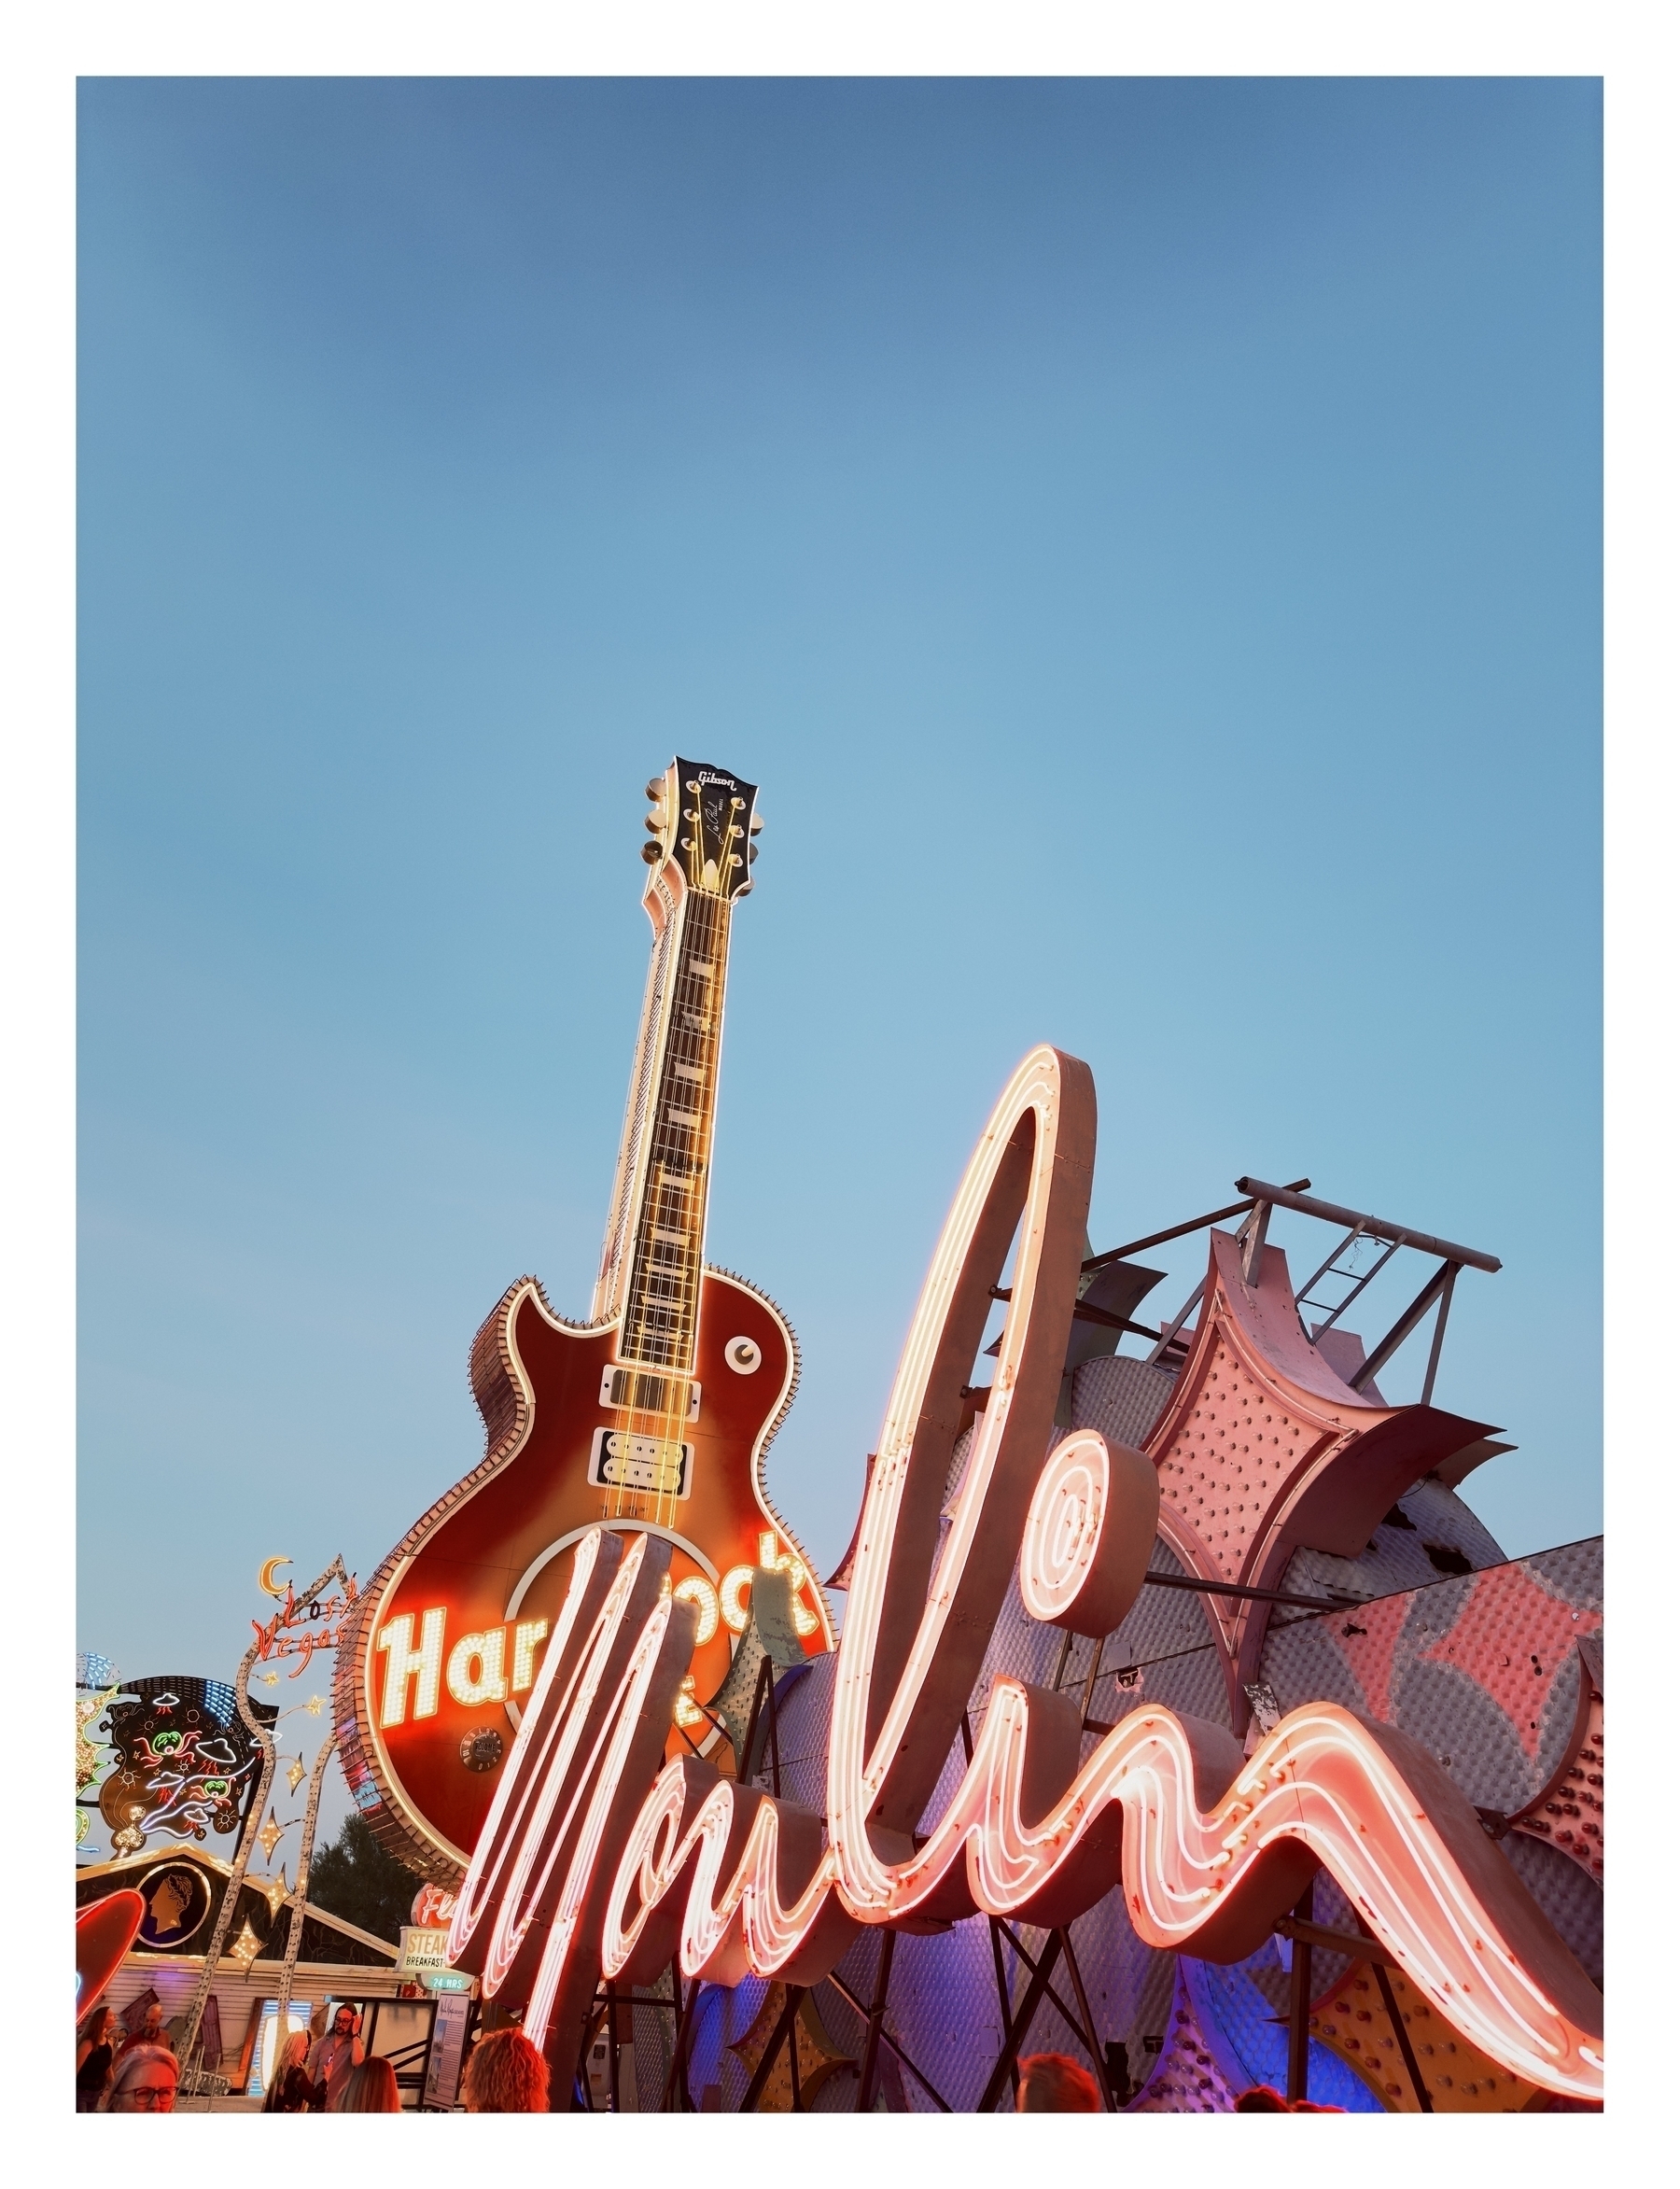 A large electric guitar sign with neon lights reads “Hard Rock” against a twilight sky, amidst other glowing amusement park attractions.